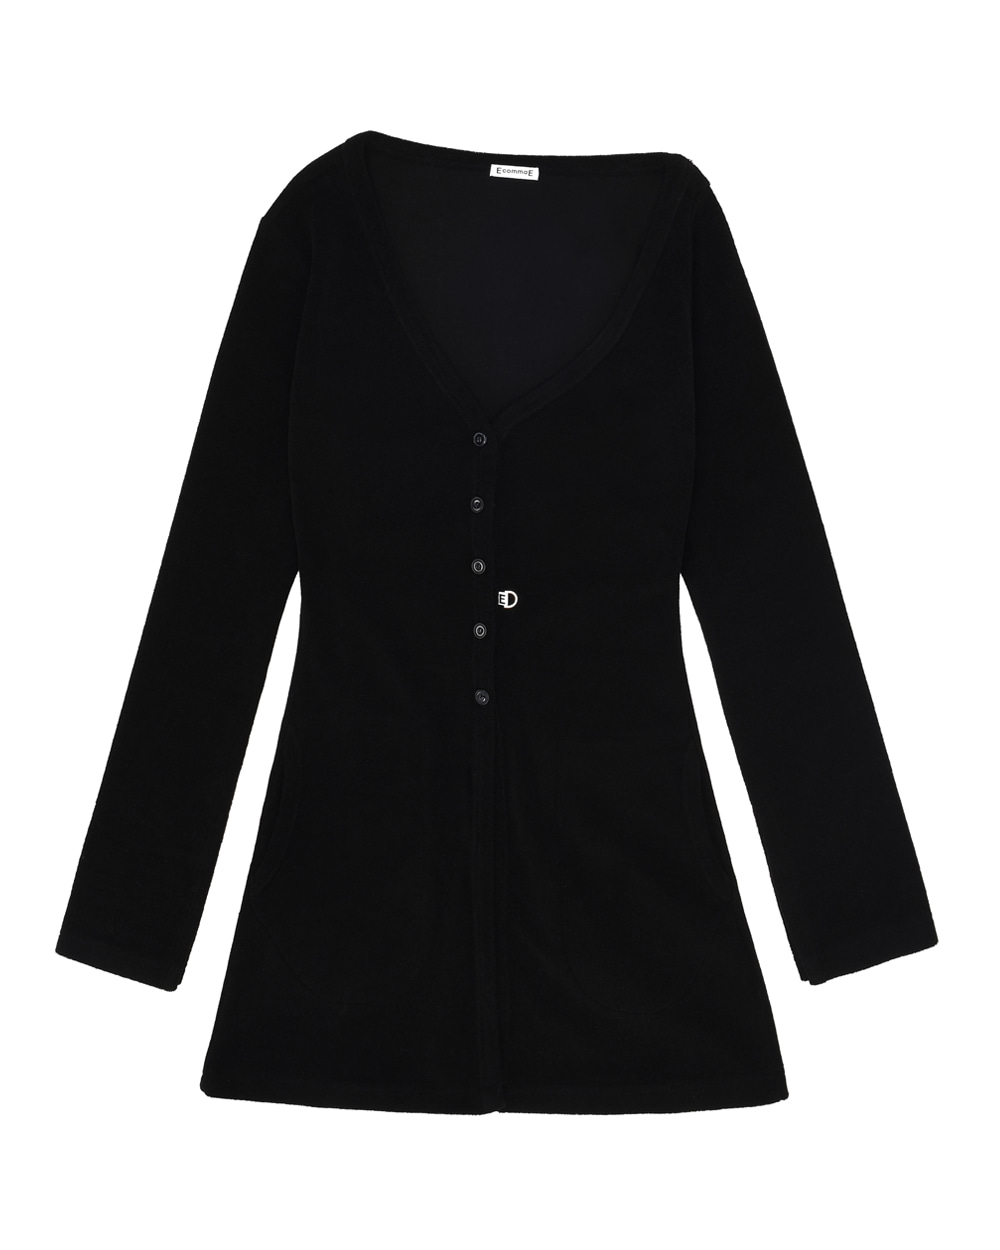 TERRY WAVE CARDIGAN (BLACK) (2colors)